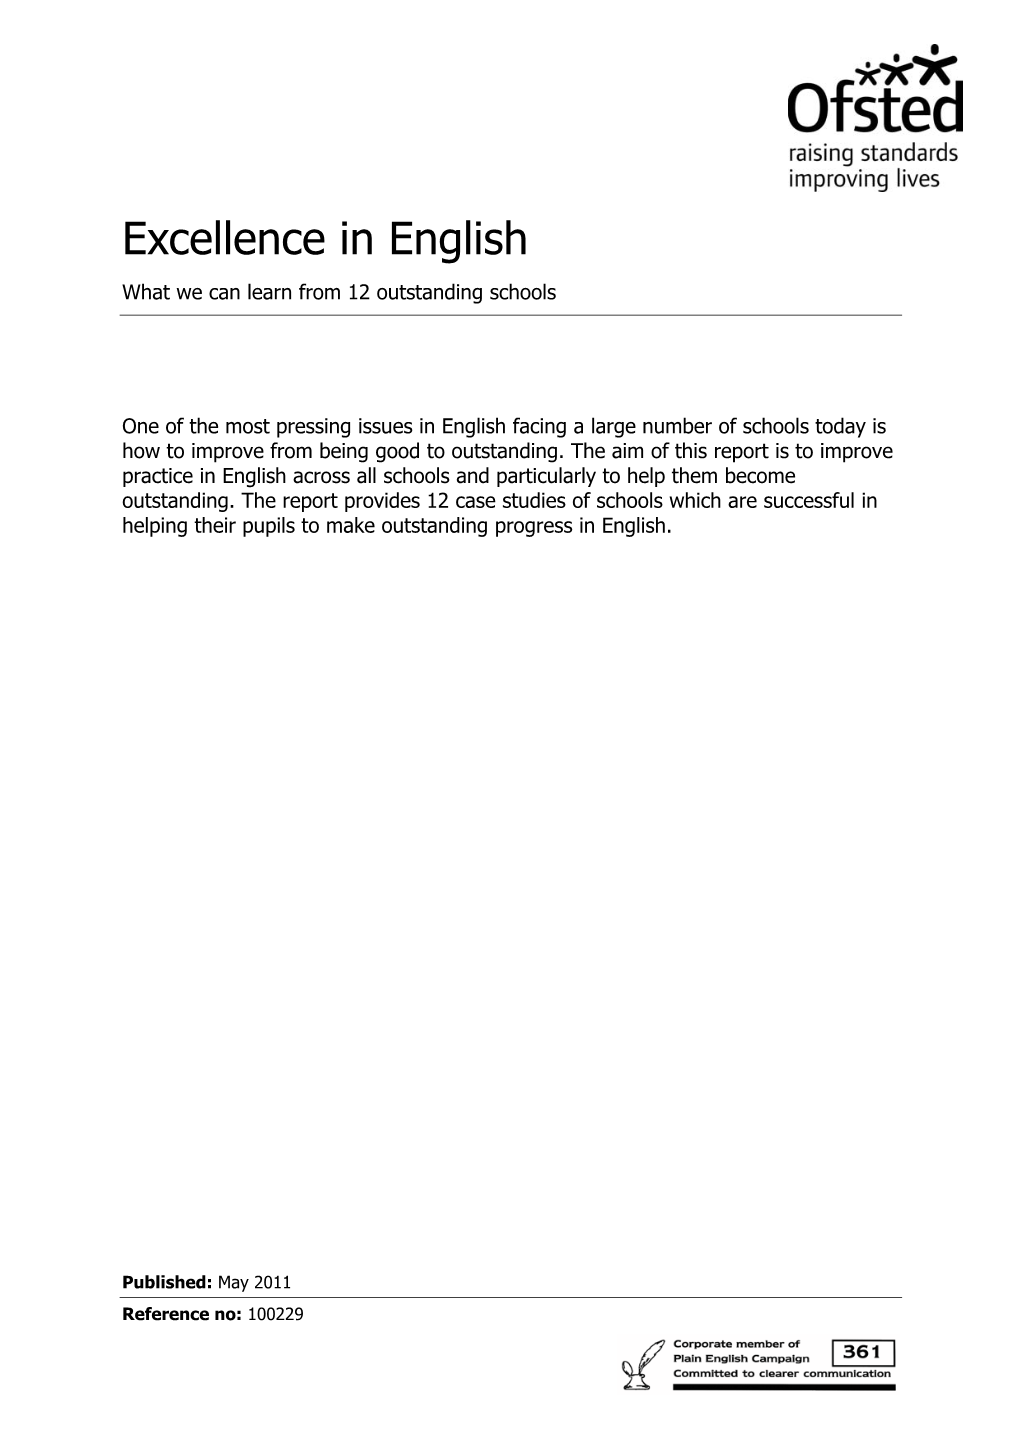 Excellence in English What We Can Learn from 12 Outstanding Schools